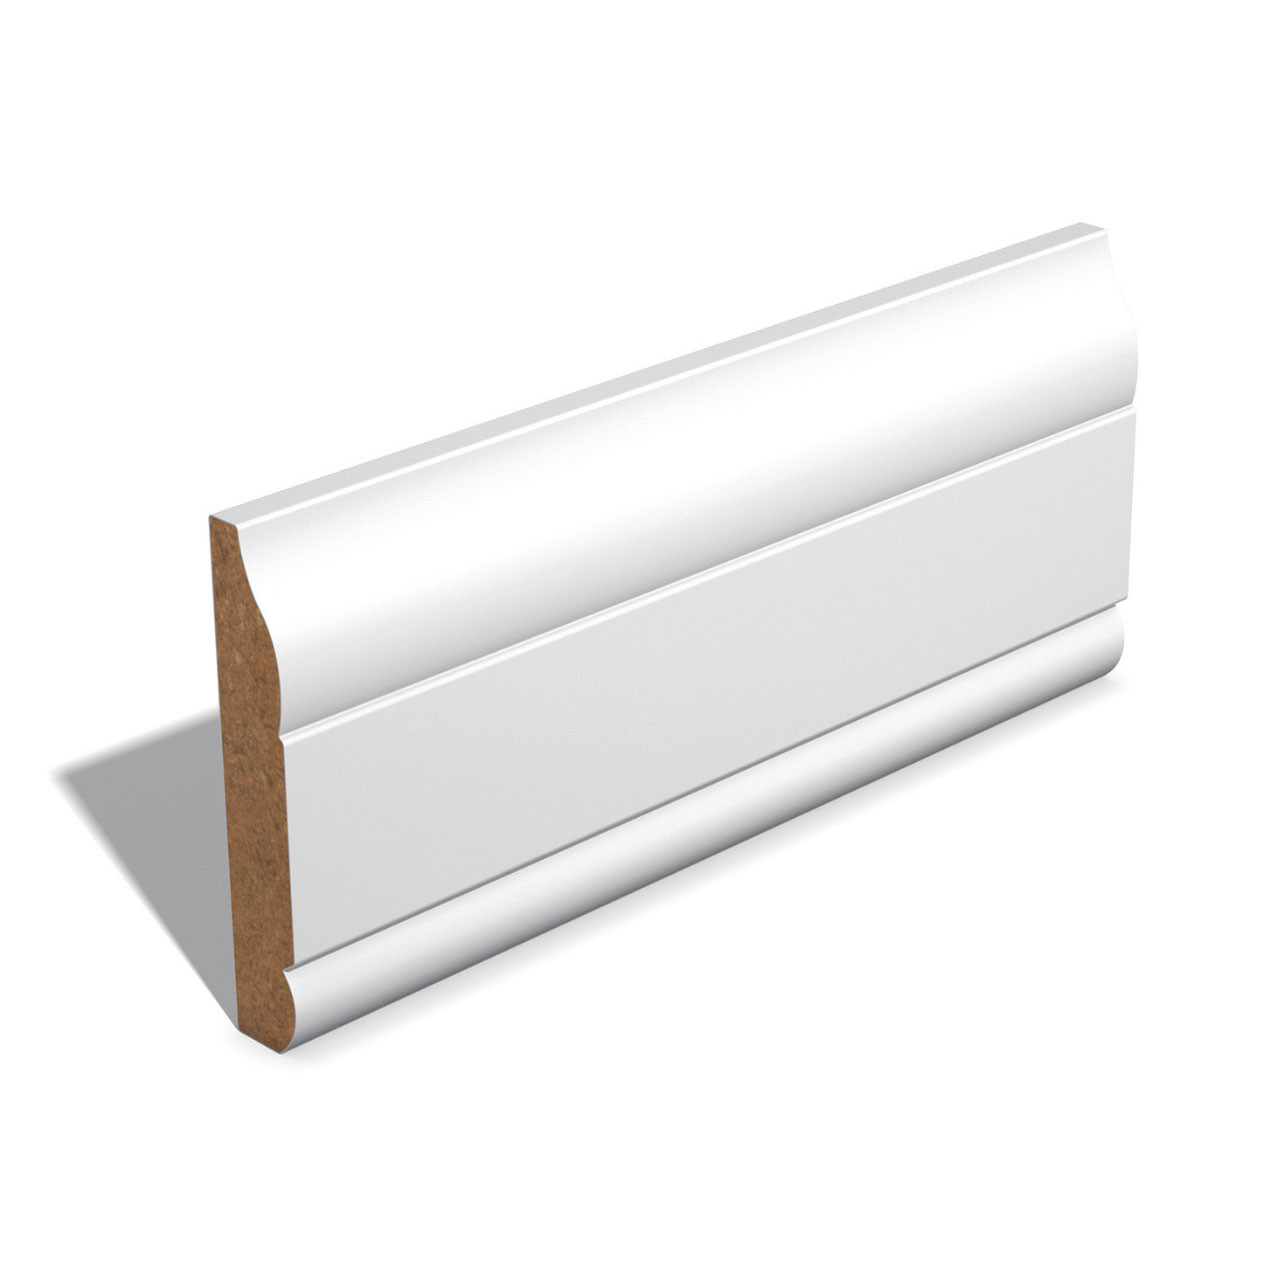 Photograph of Ogee & Bead MDF Facing Primed 14.5 x 94 x 5490mm